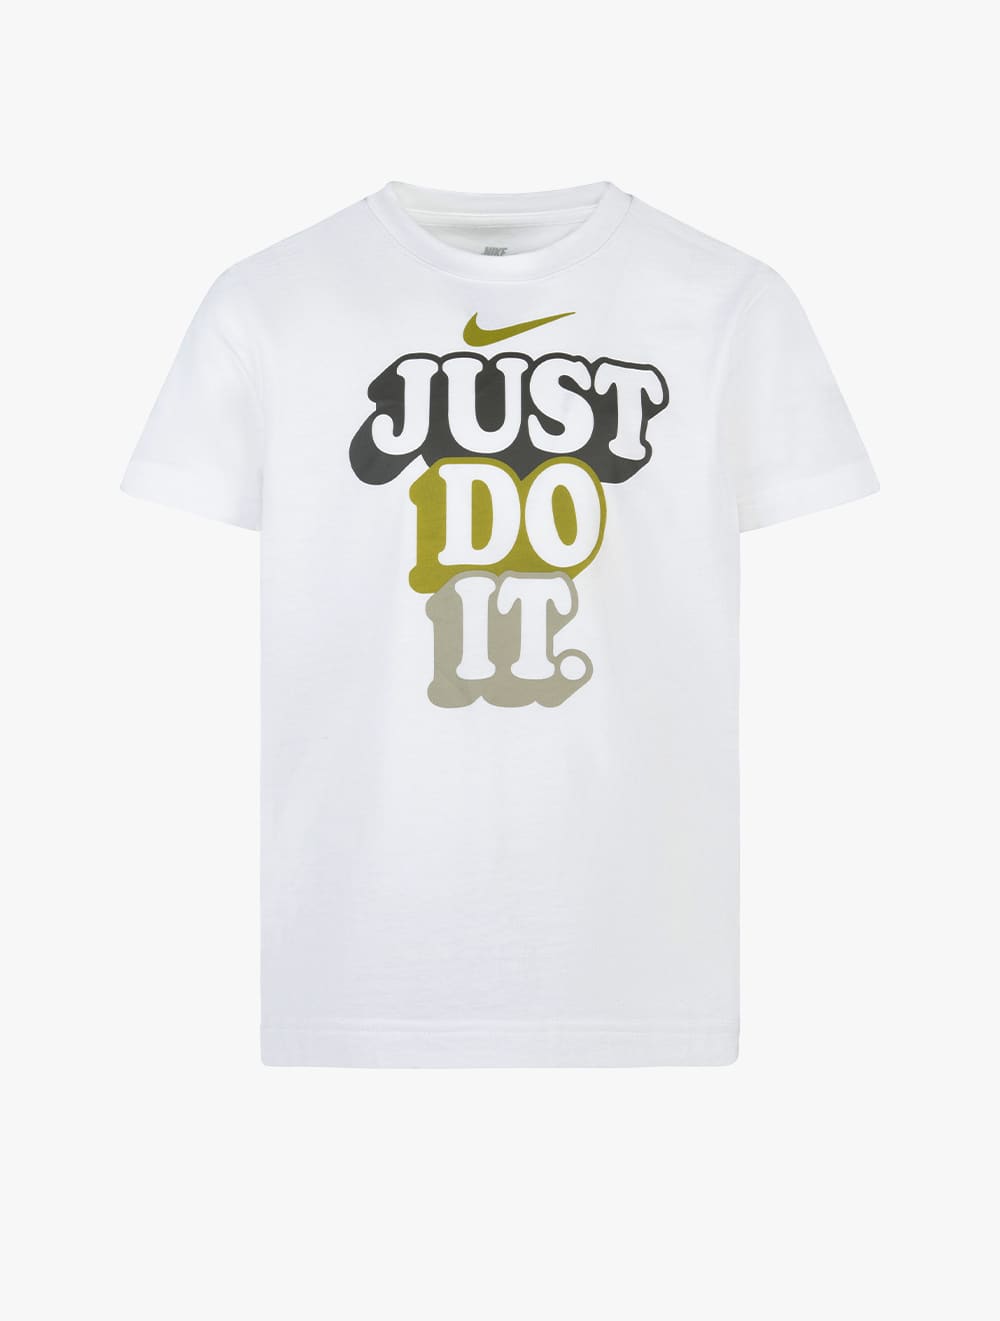 Nike Young Athlete Camp Boy's T-Shirt -WHITE